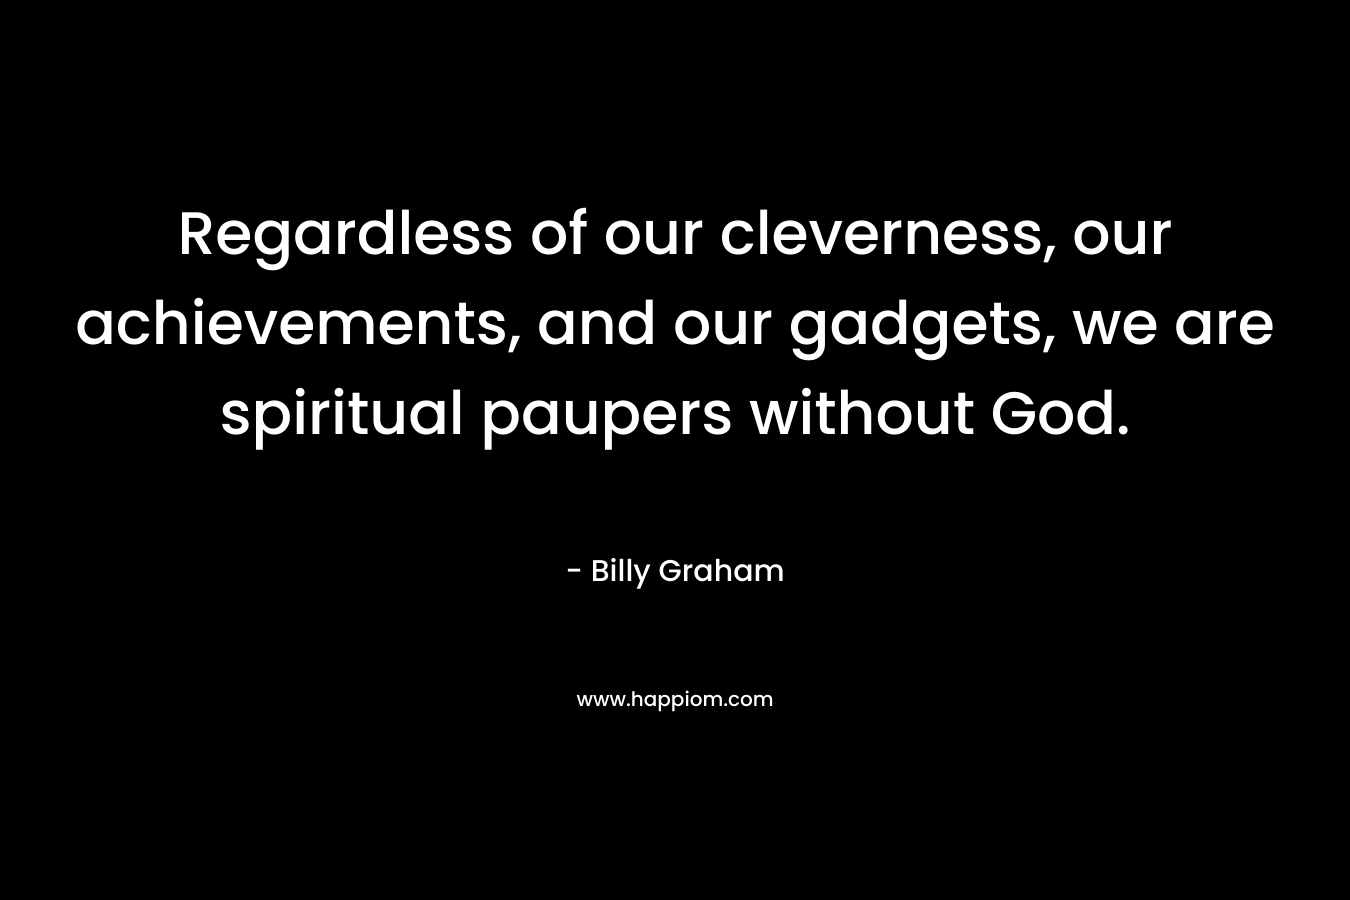 Regardless of our cleverness, our achievements, and our gadgets, we are spiritual paupers without God.